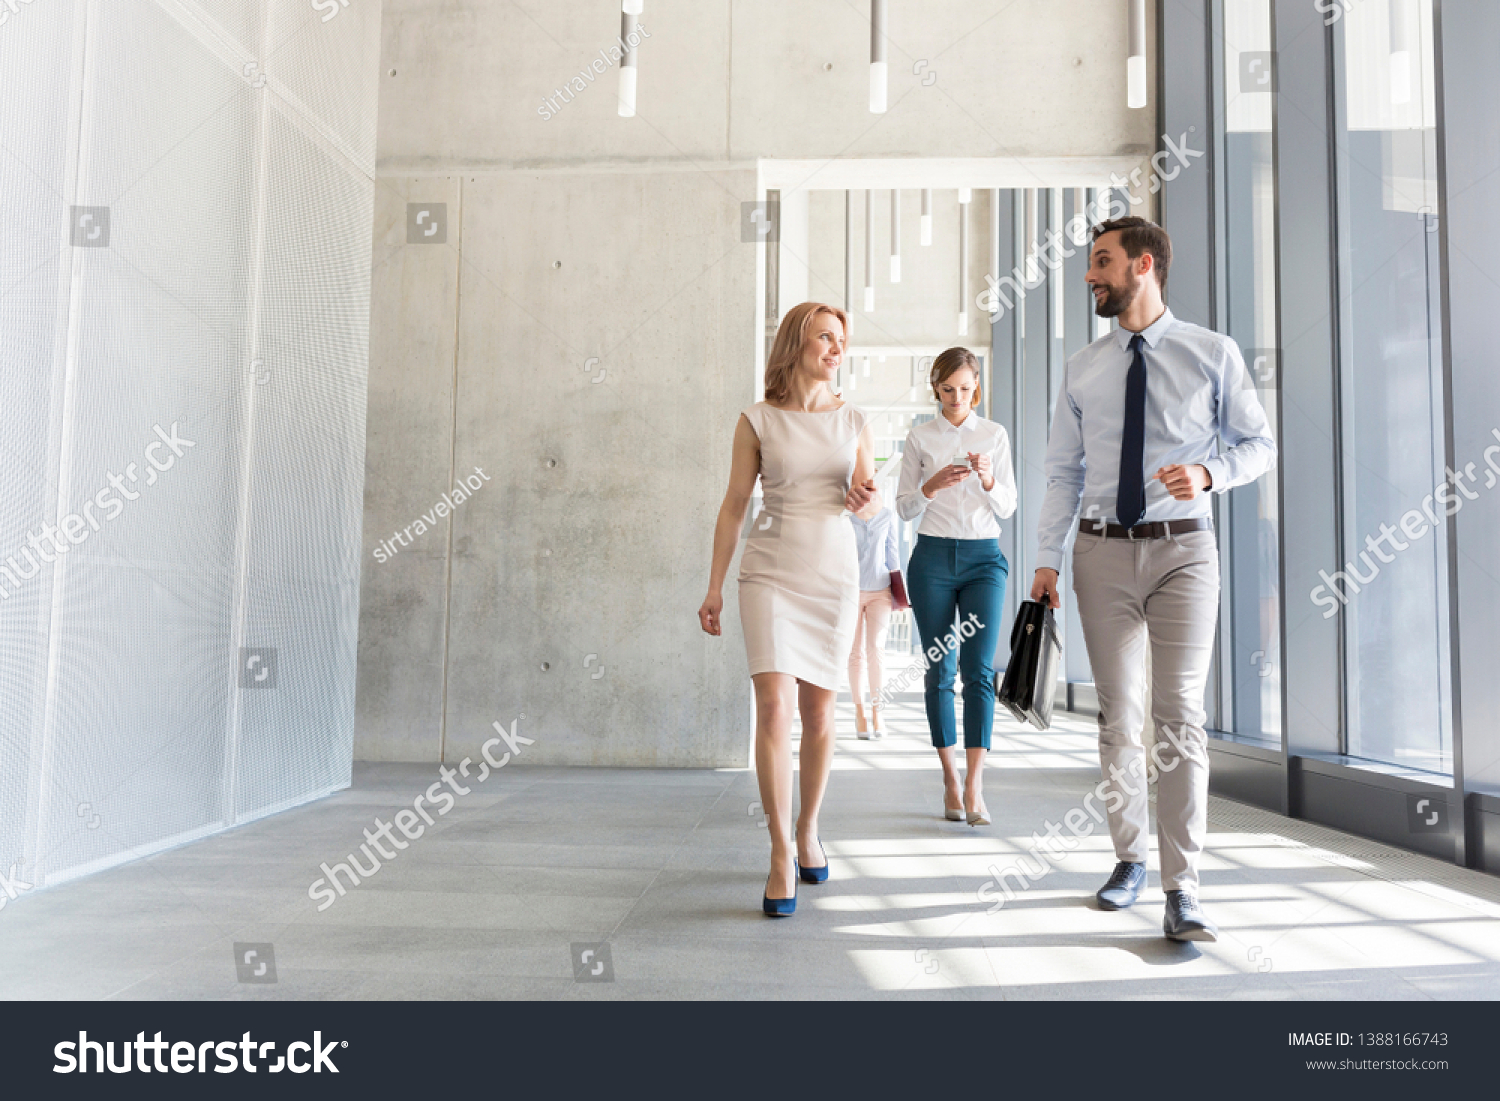 Business professionals talking while walking in office corridor #1388166743